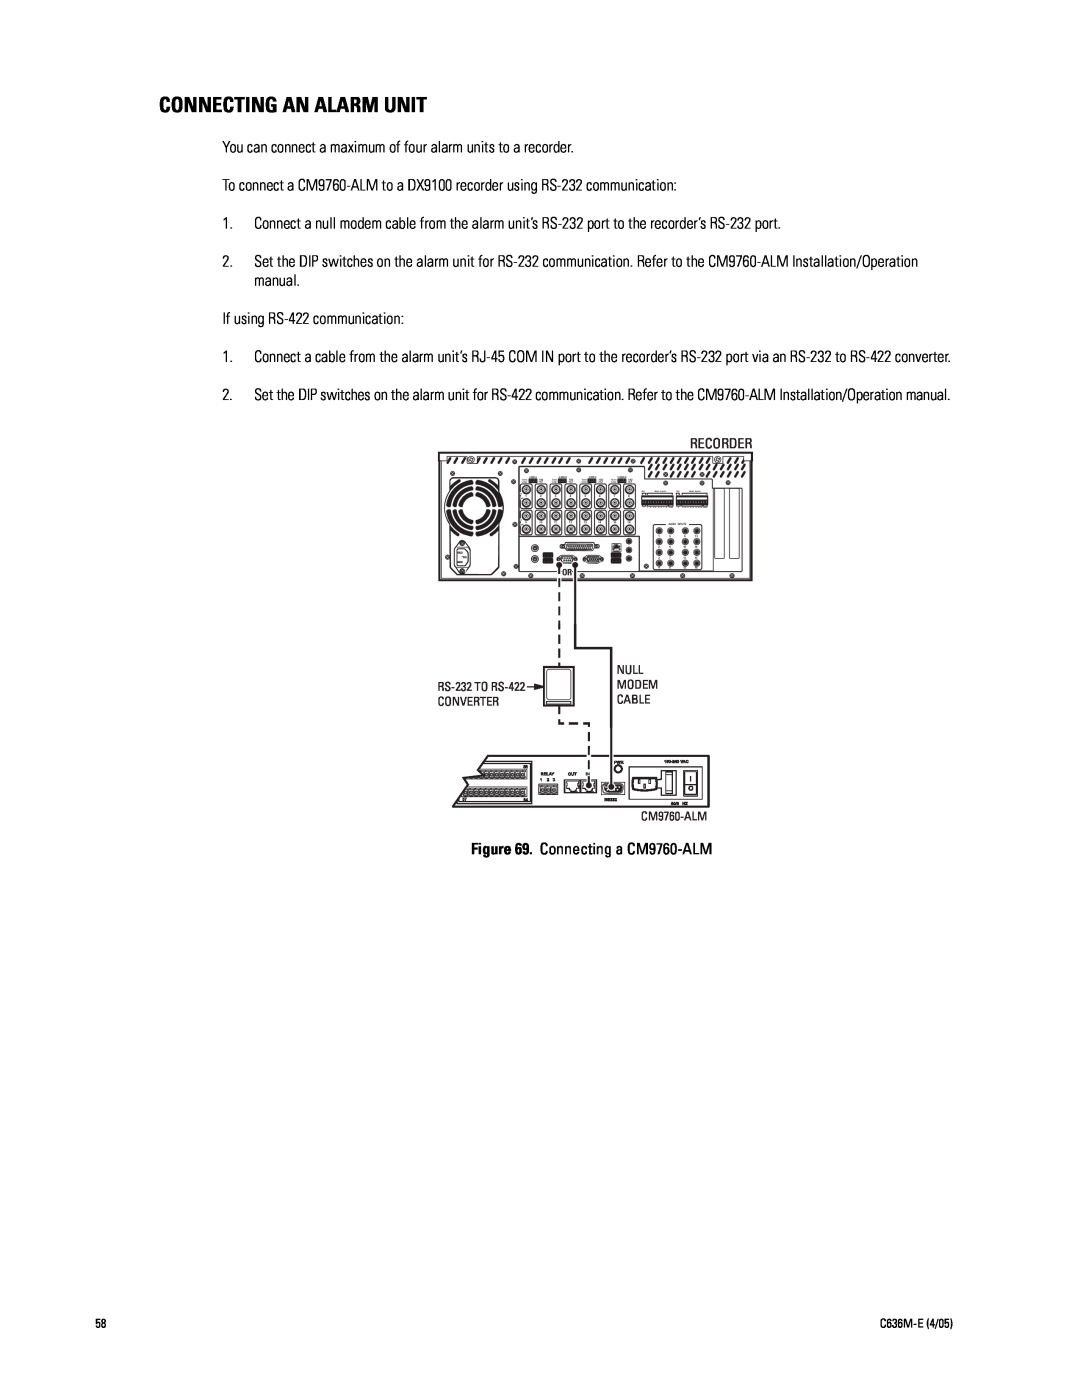 Pelco DX9100 installation manual Connecting An Alarm Unit 